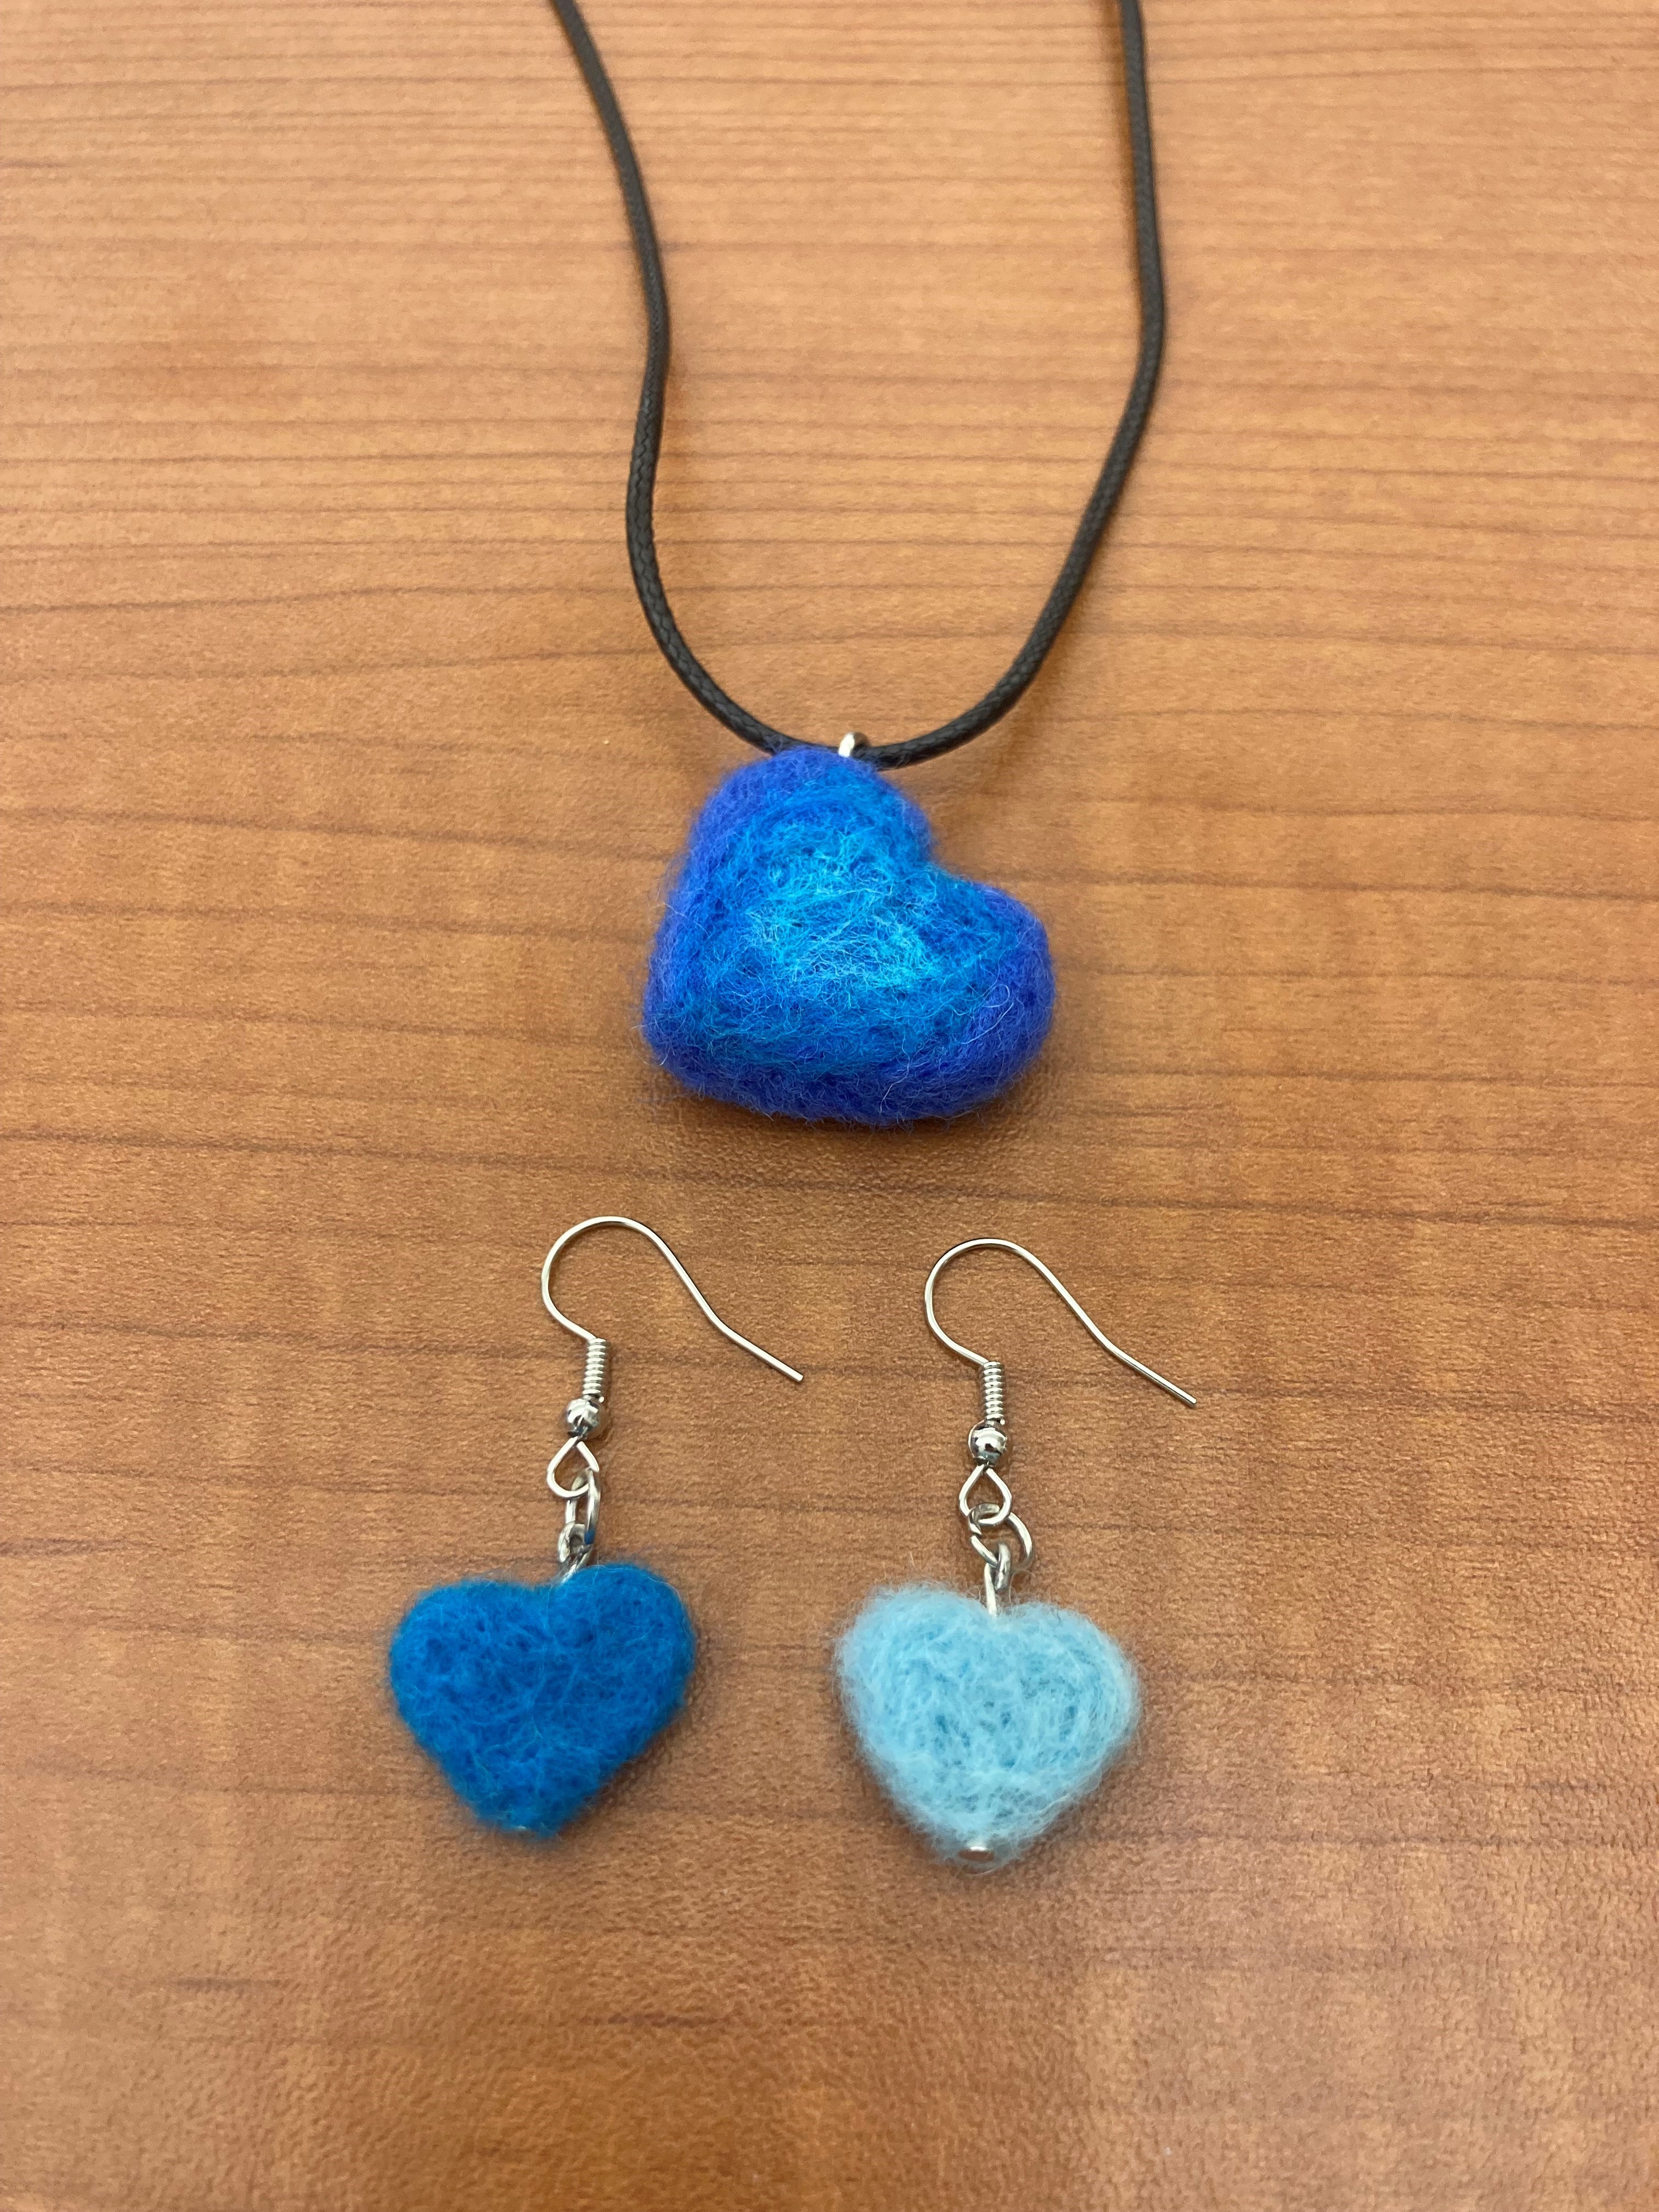 Blue felted wool heart shaped earrings and necklace.